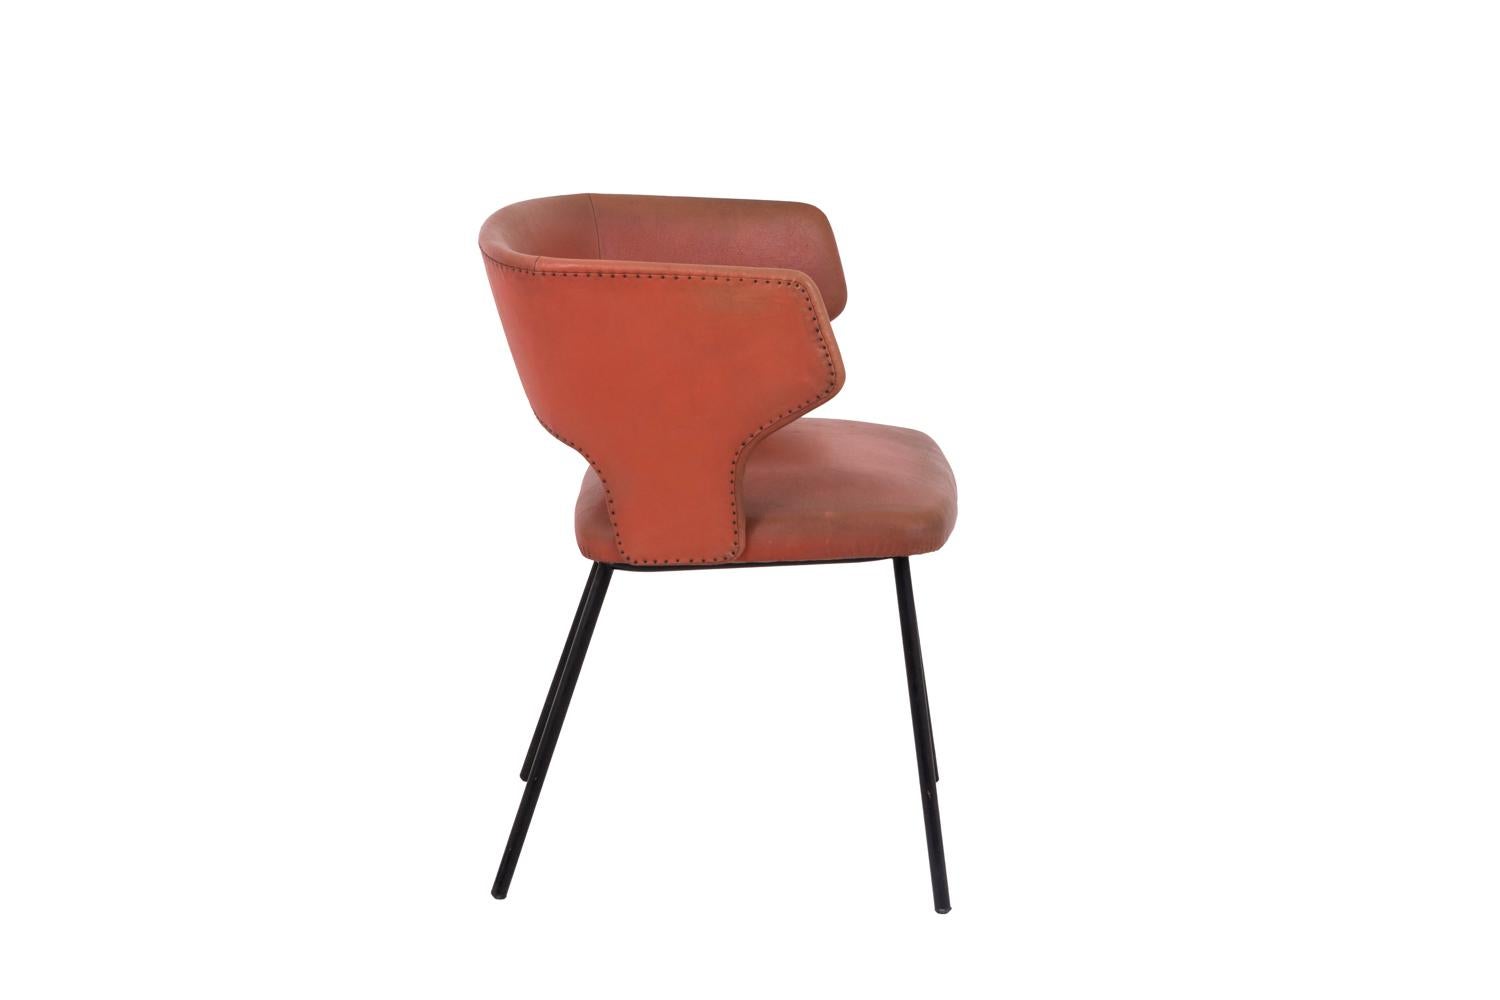 Mid-Century Modern Armchair in Orange Skai and Black Lacquered Metal, 1950s For Sale